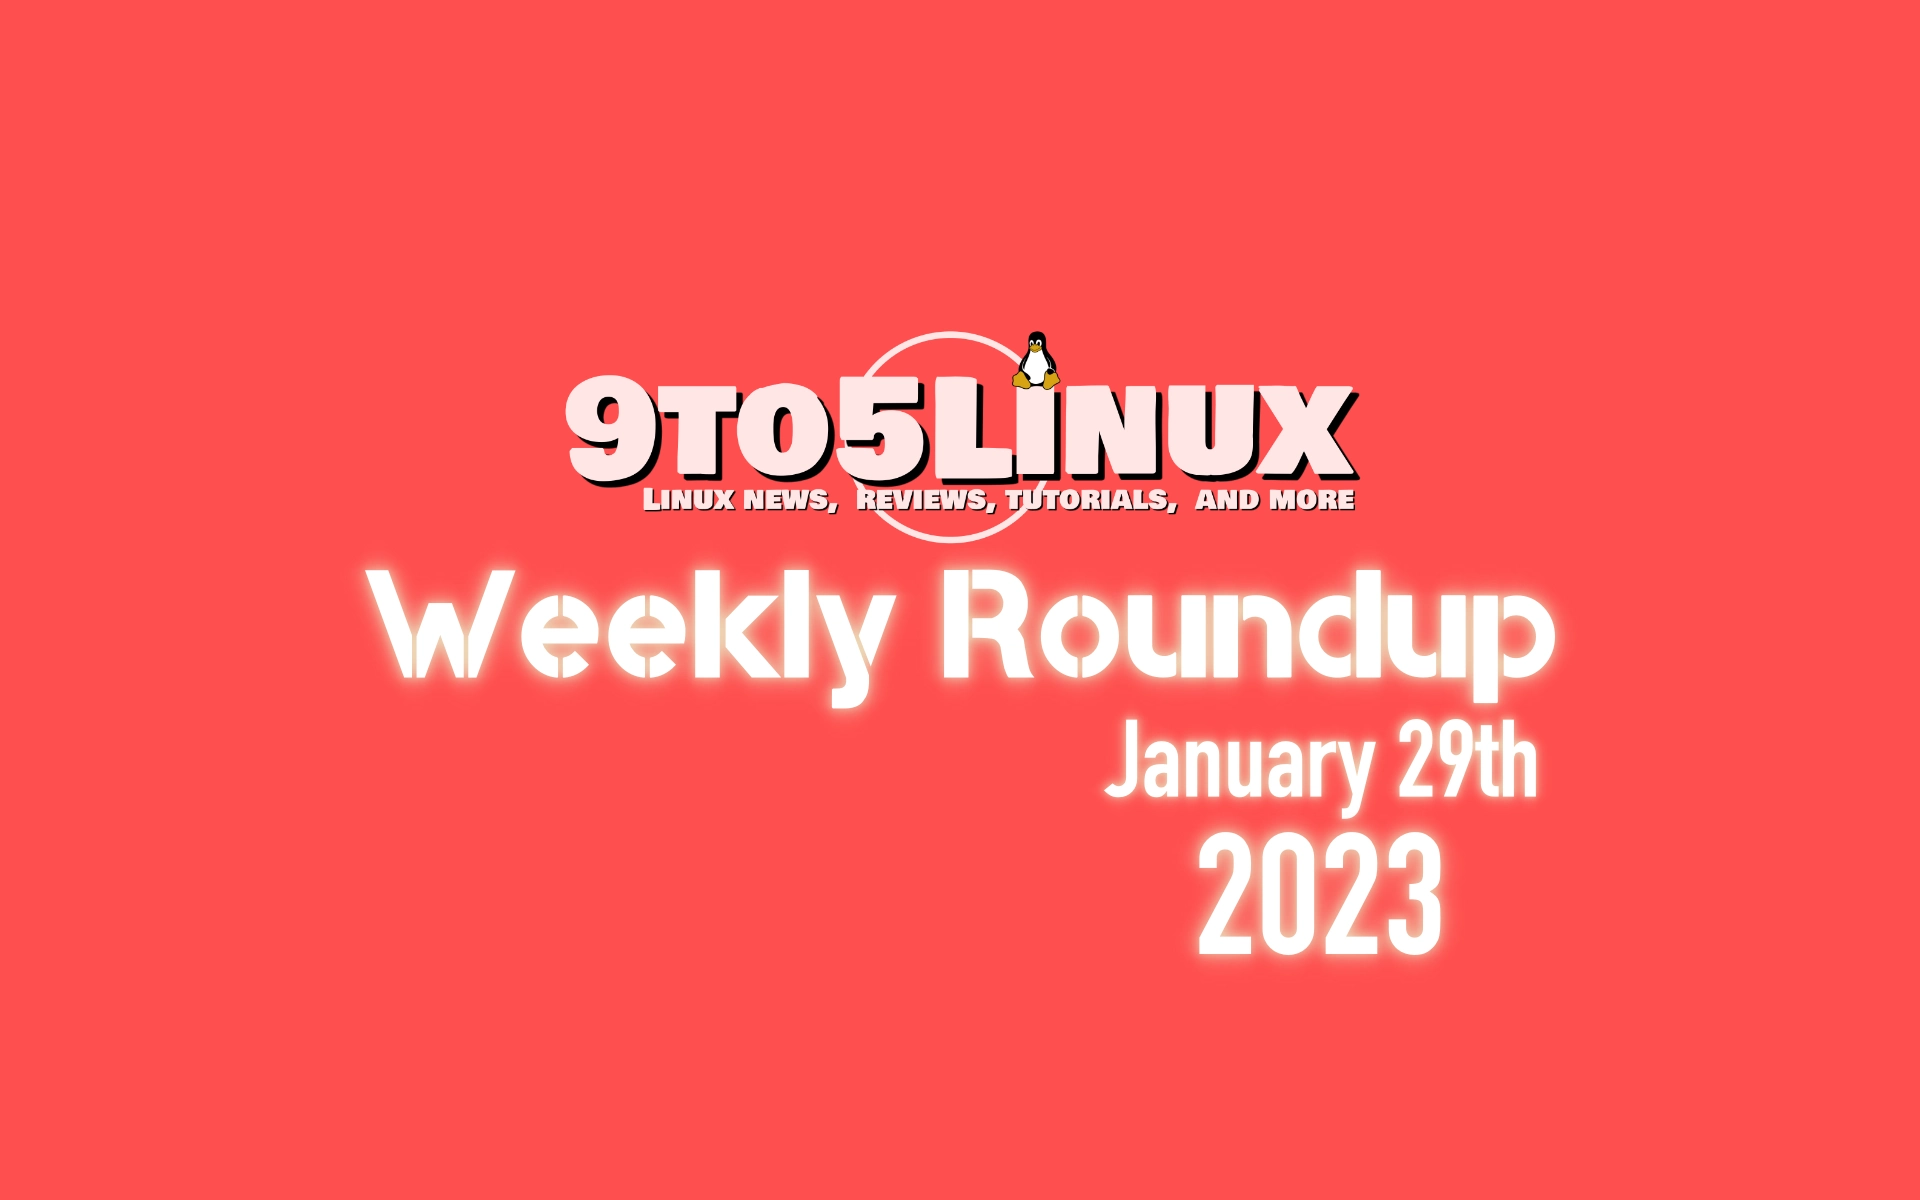 9to5Linux Weekly Roundup: January 29th, 2023